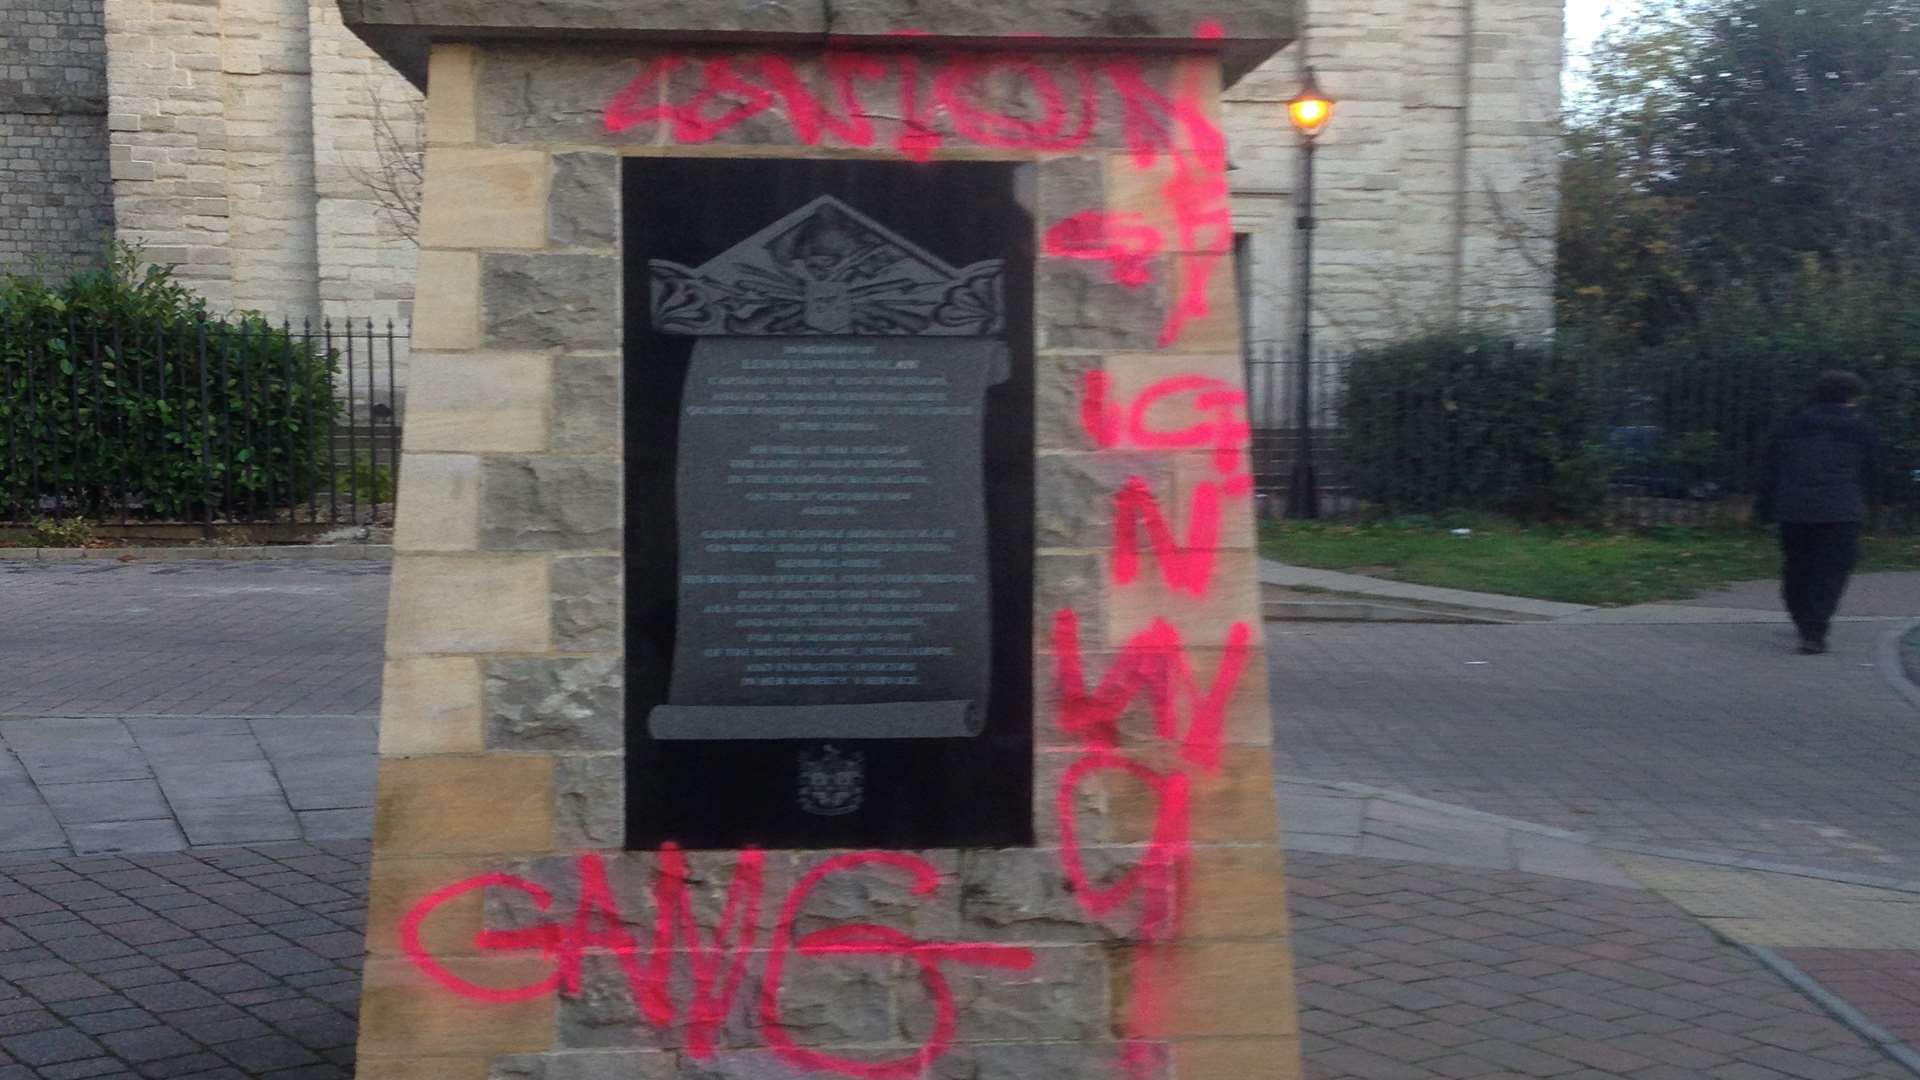 The plinth of the memorial has been defaced